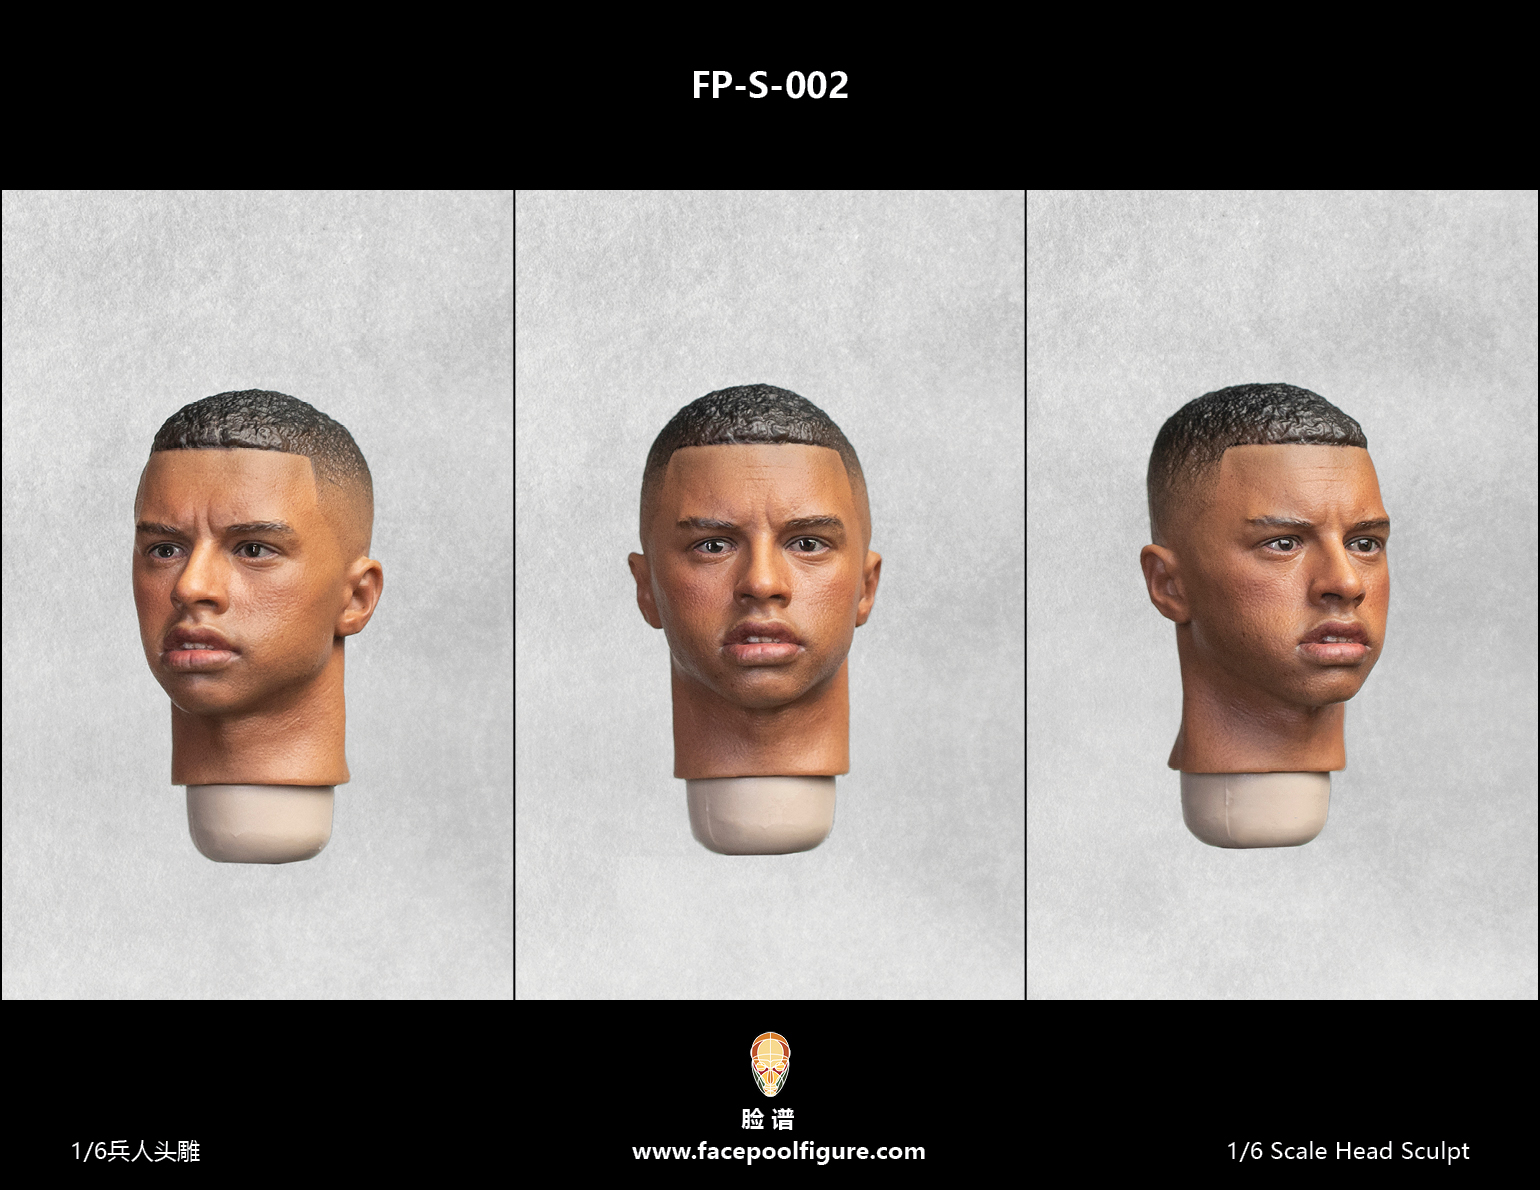 Facepoolfigure FP-S-002 Black FacepoolFigure Sculpt Male Head Online 1/6 – with Expression Store